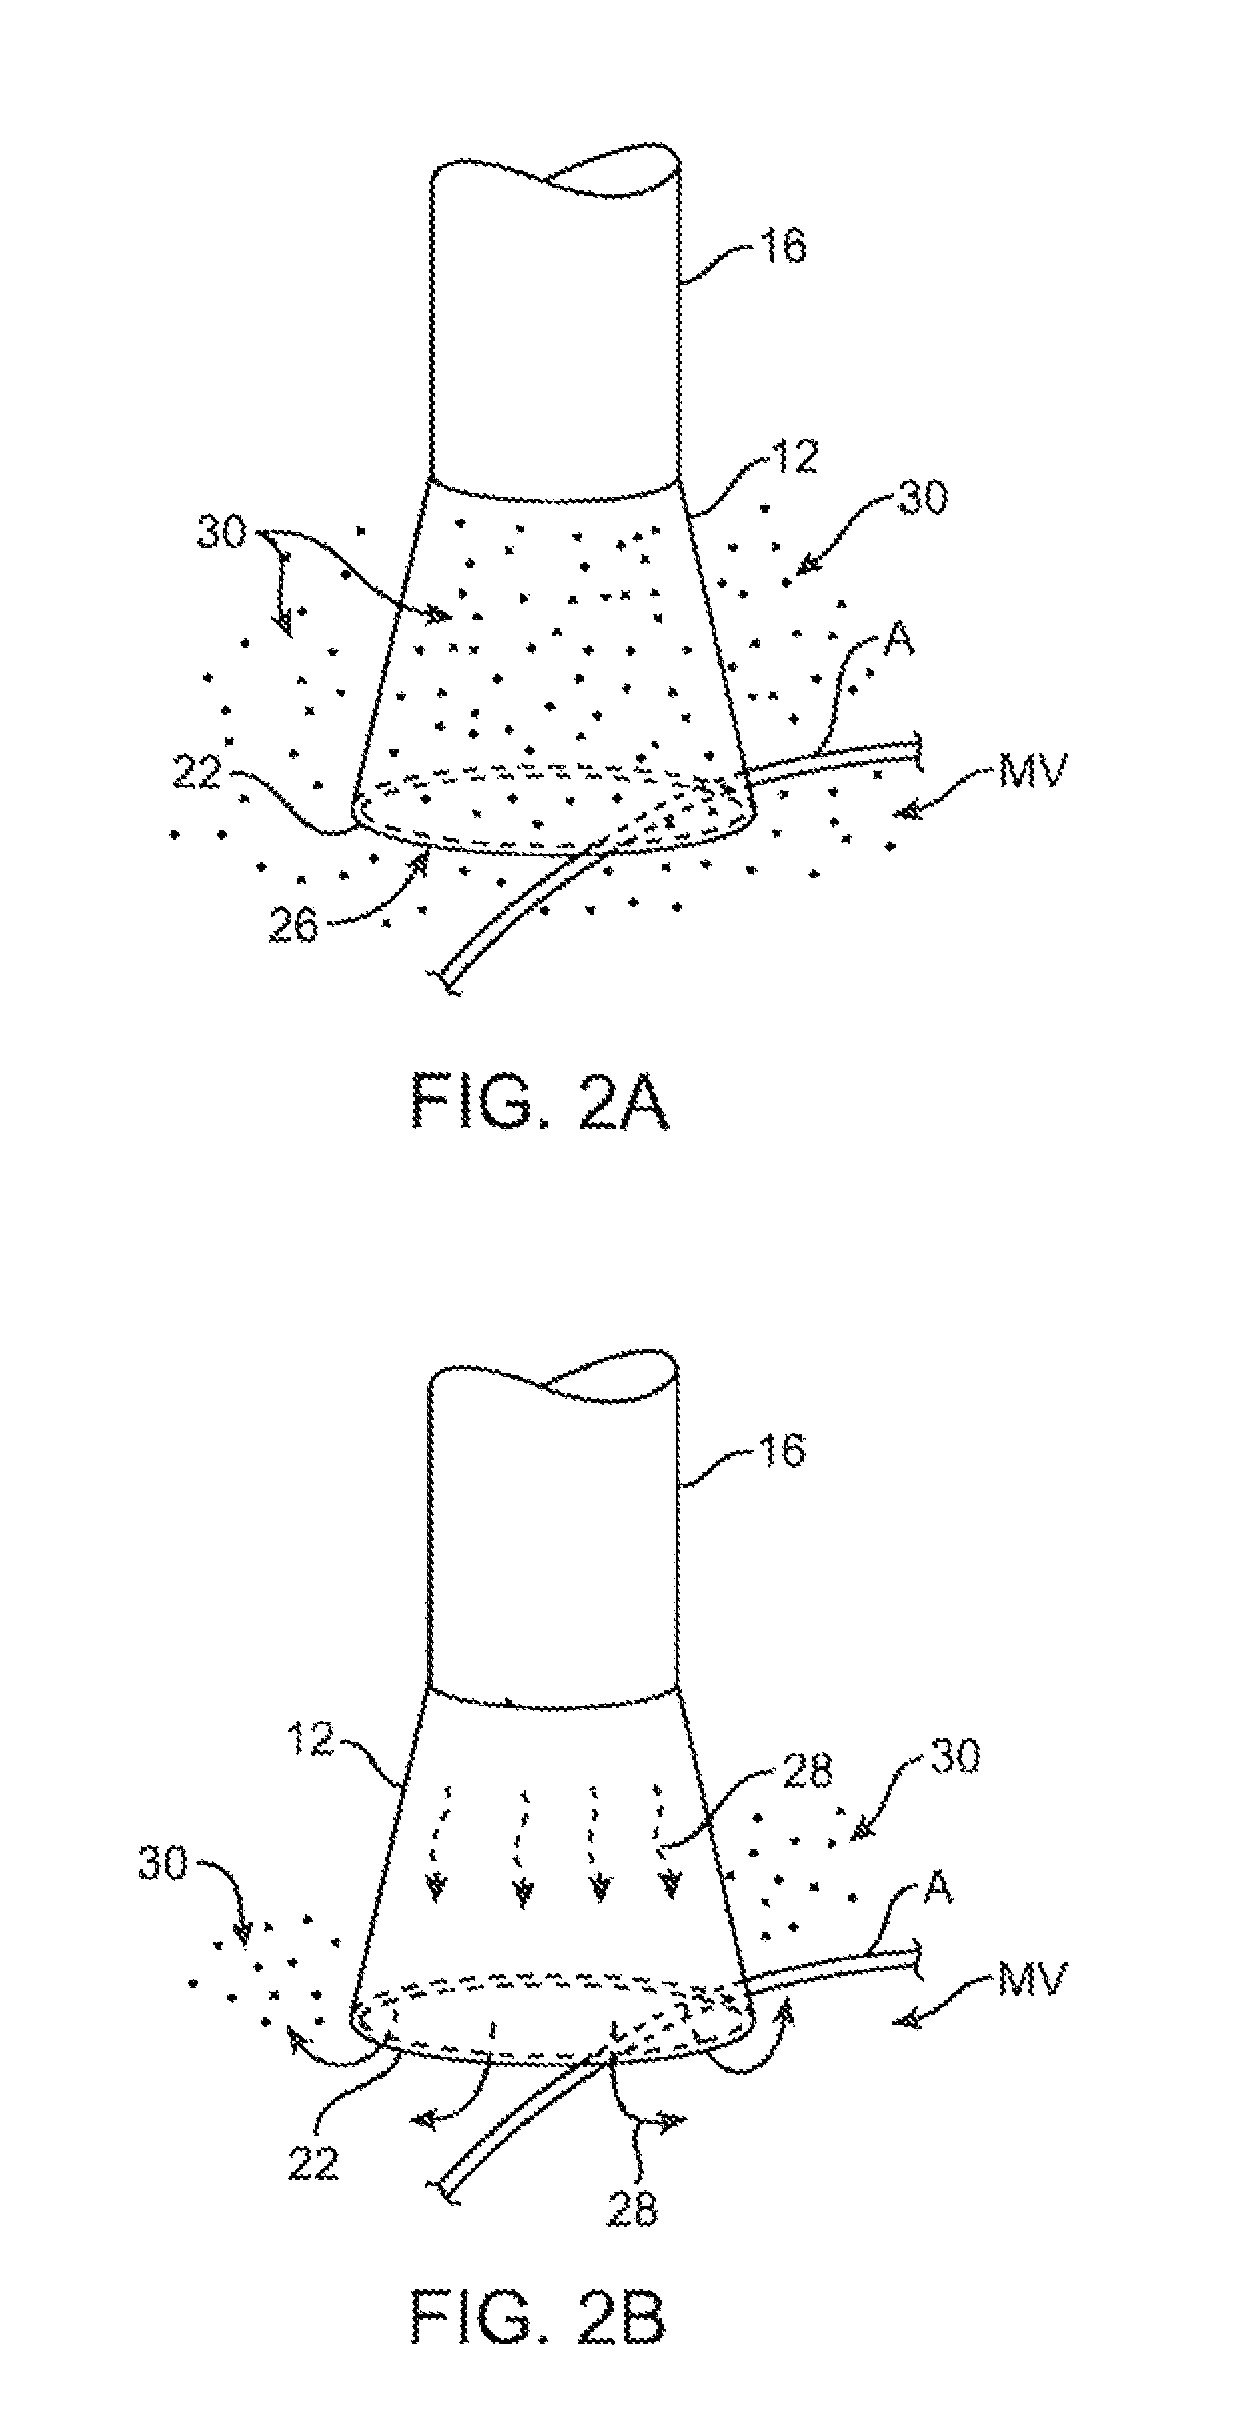 Method of forming electrode placement and connection systems